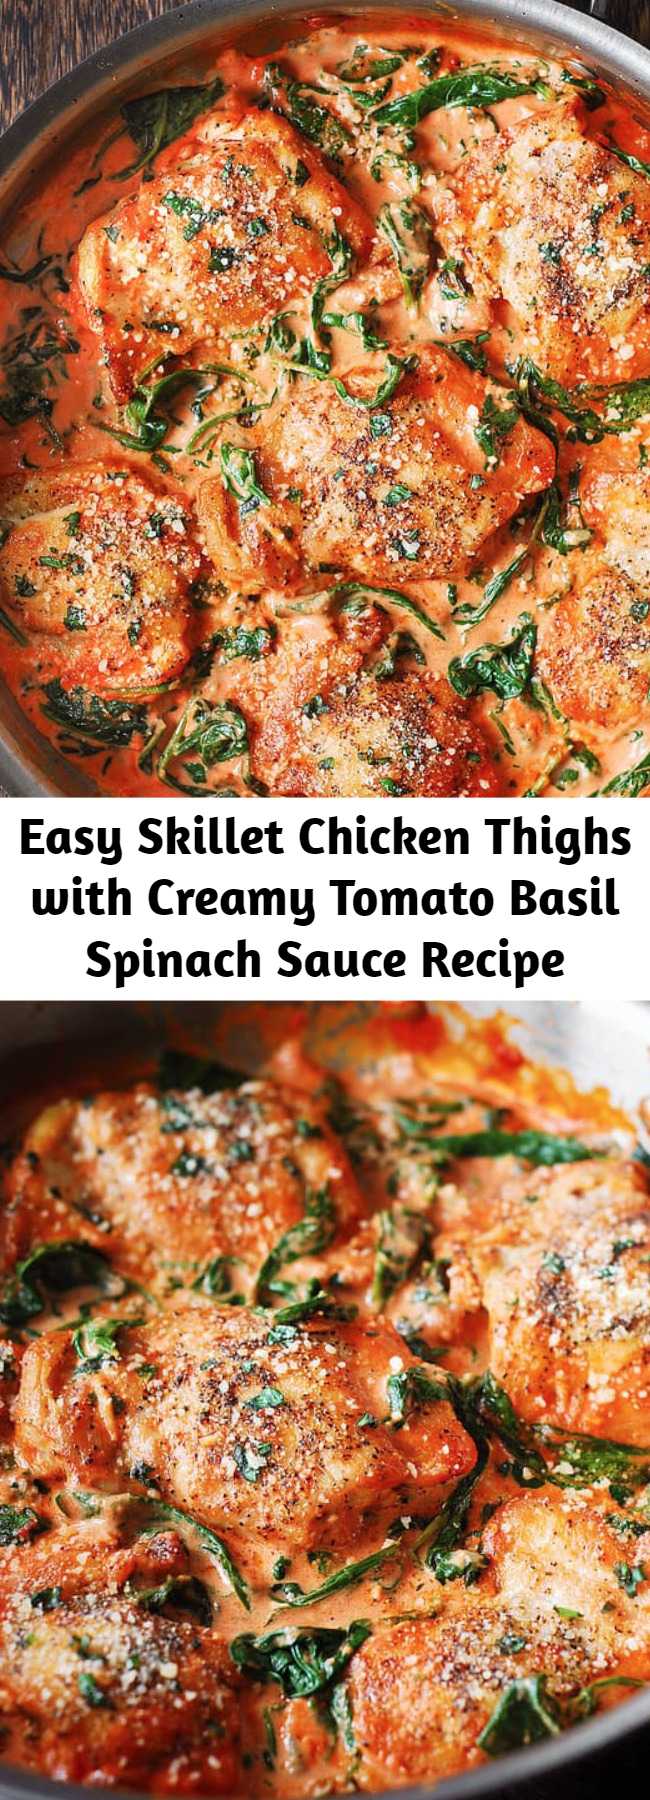 Easy Skillet Chicken Thighs with Creamy Tomato Basil Spinach Sauce Recipe - The whole recipe takes 30 minutes from start to finish! Boneless skinless chicken thighs are seared to perfection and served in a creamy tomato basil sauce with spinach, sprinkled with grated Parmesan cheese. Easy dinner that a whole family will love! #chicken #chickenthighs #chickendinner #tomatobasil #tomatobasilsauce #spinachsauce #spinach #basil #glutenfree